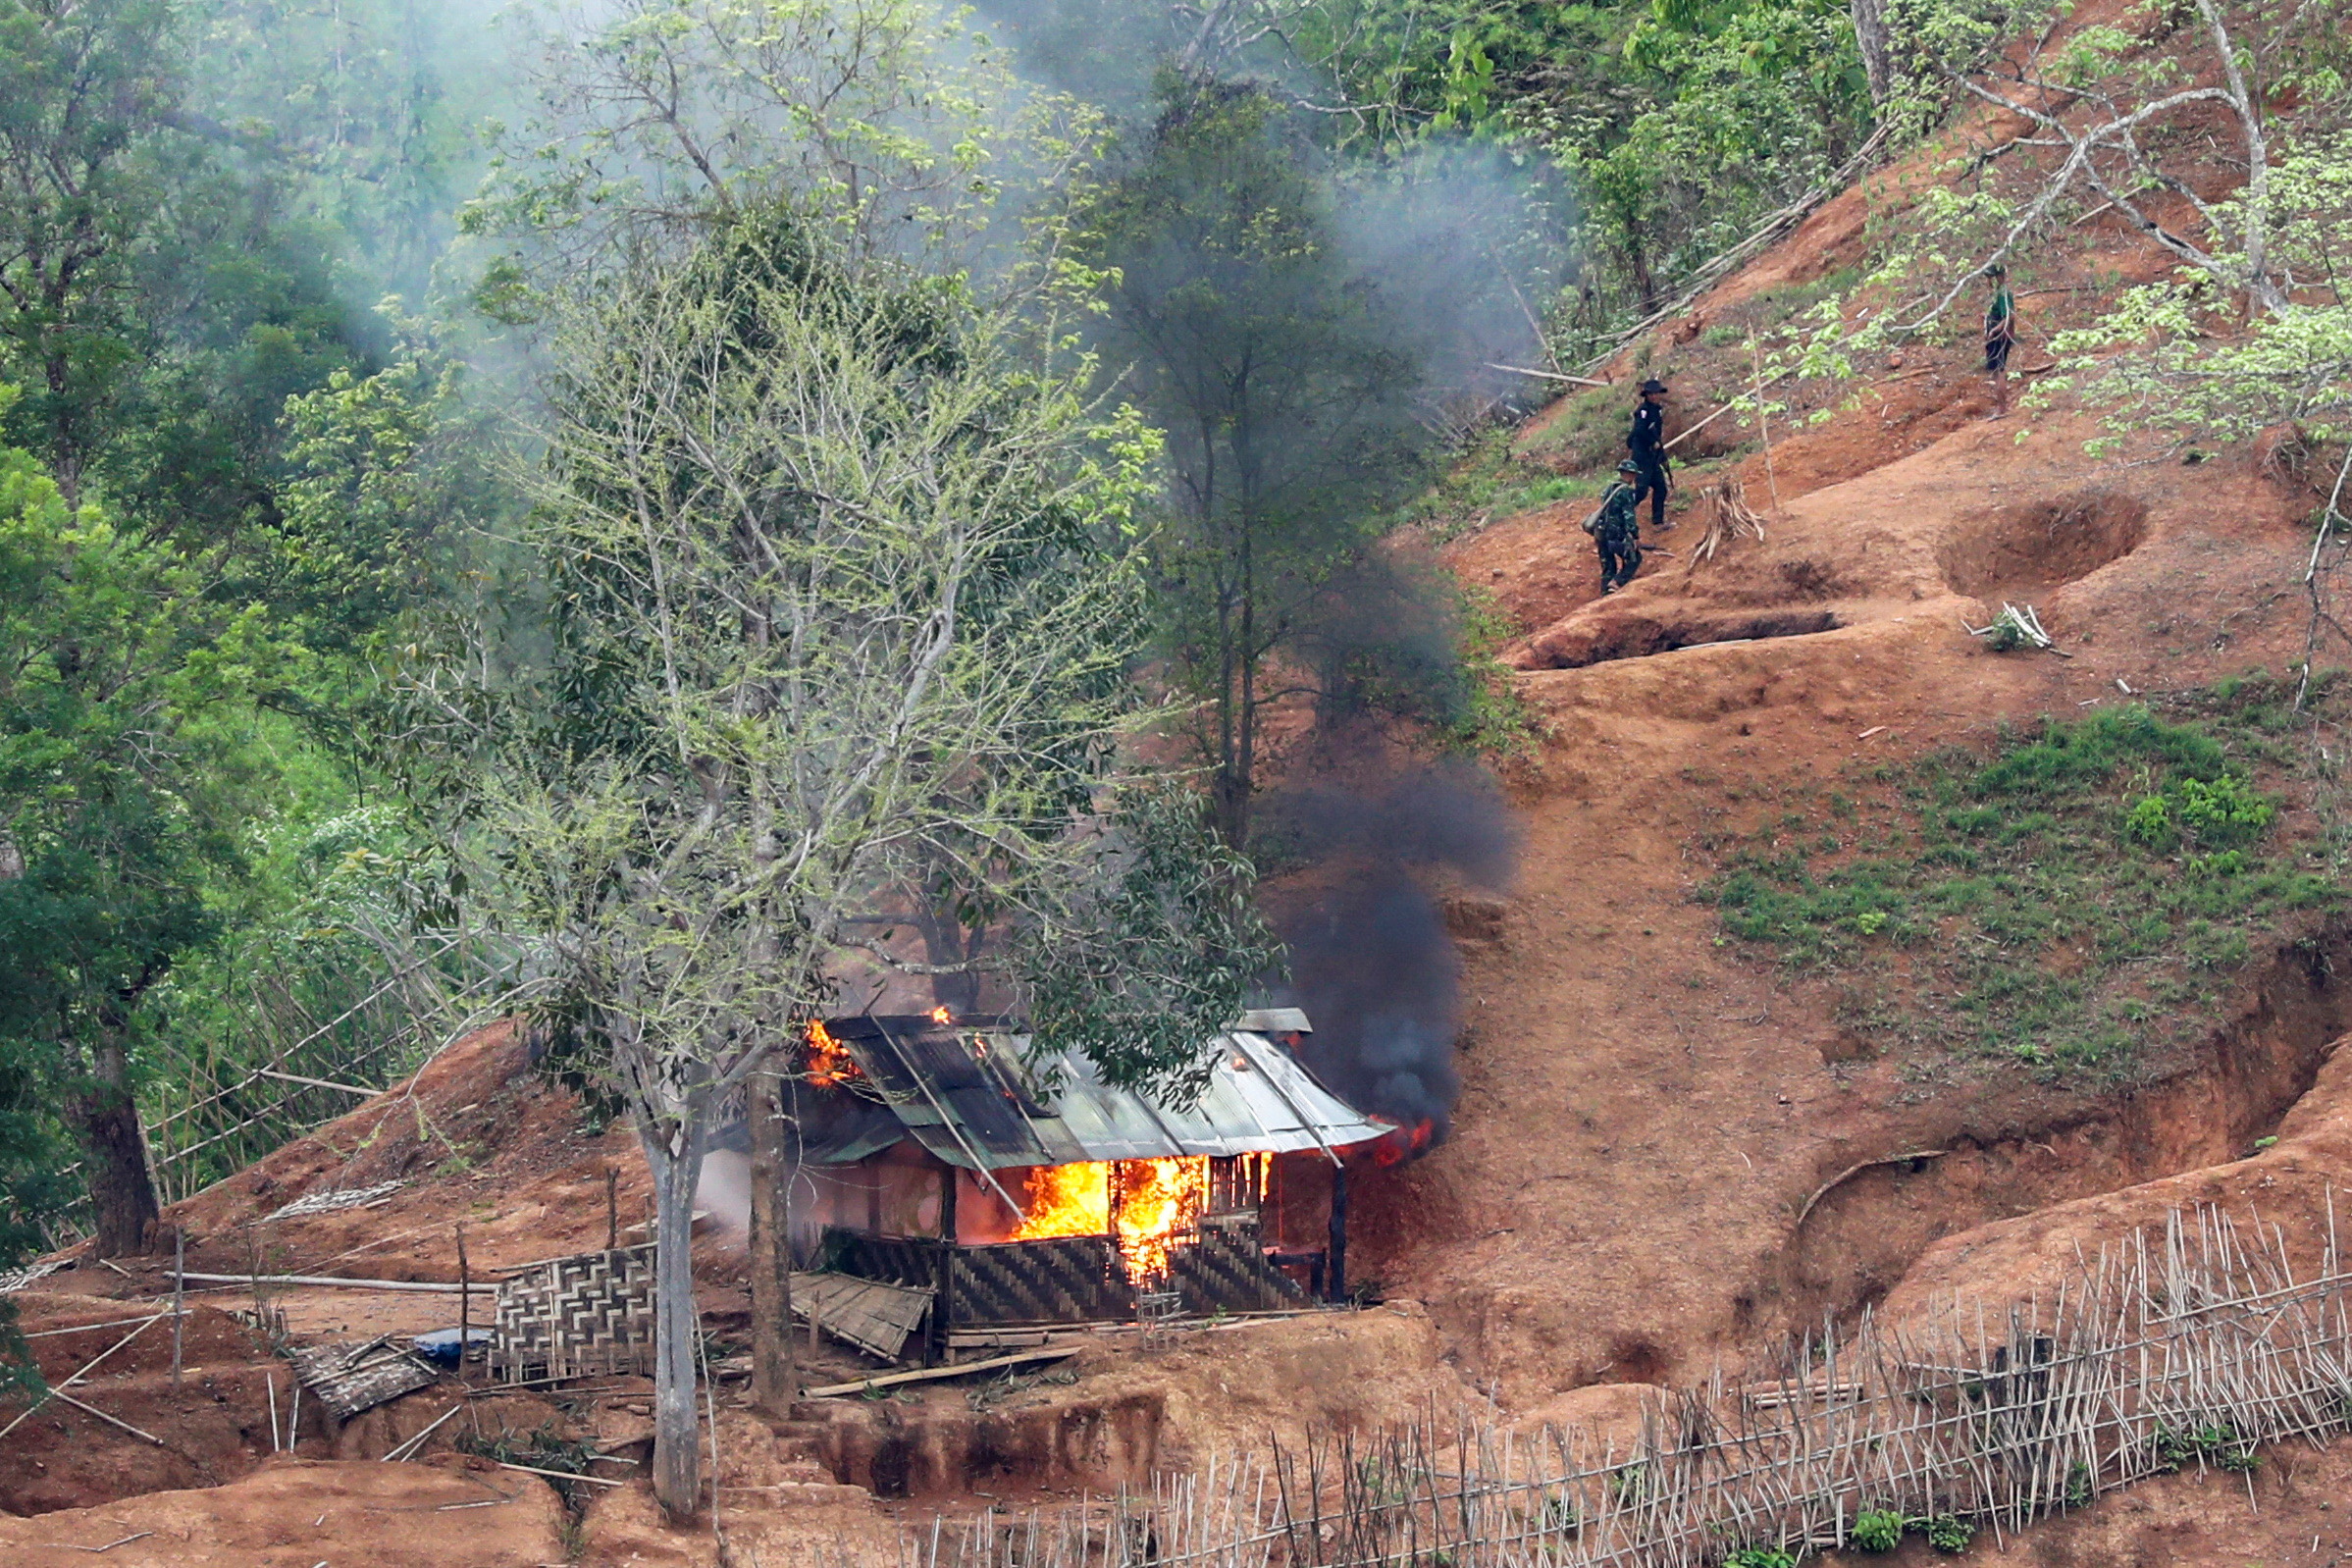 Ethnic minority Karen troops are seen after setting fire to a building inside a Myanmar army outpost near the Thai border, which is seen from the Thai side on the Thanlwin, also known as Salween, riverbank in Mae Hong Son province, Thailand, April 28, 2021. REUTERS/Athit Perawongmetha     TPX IMAGES OF THE DAY